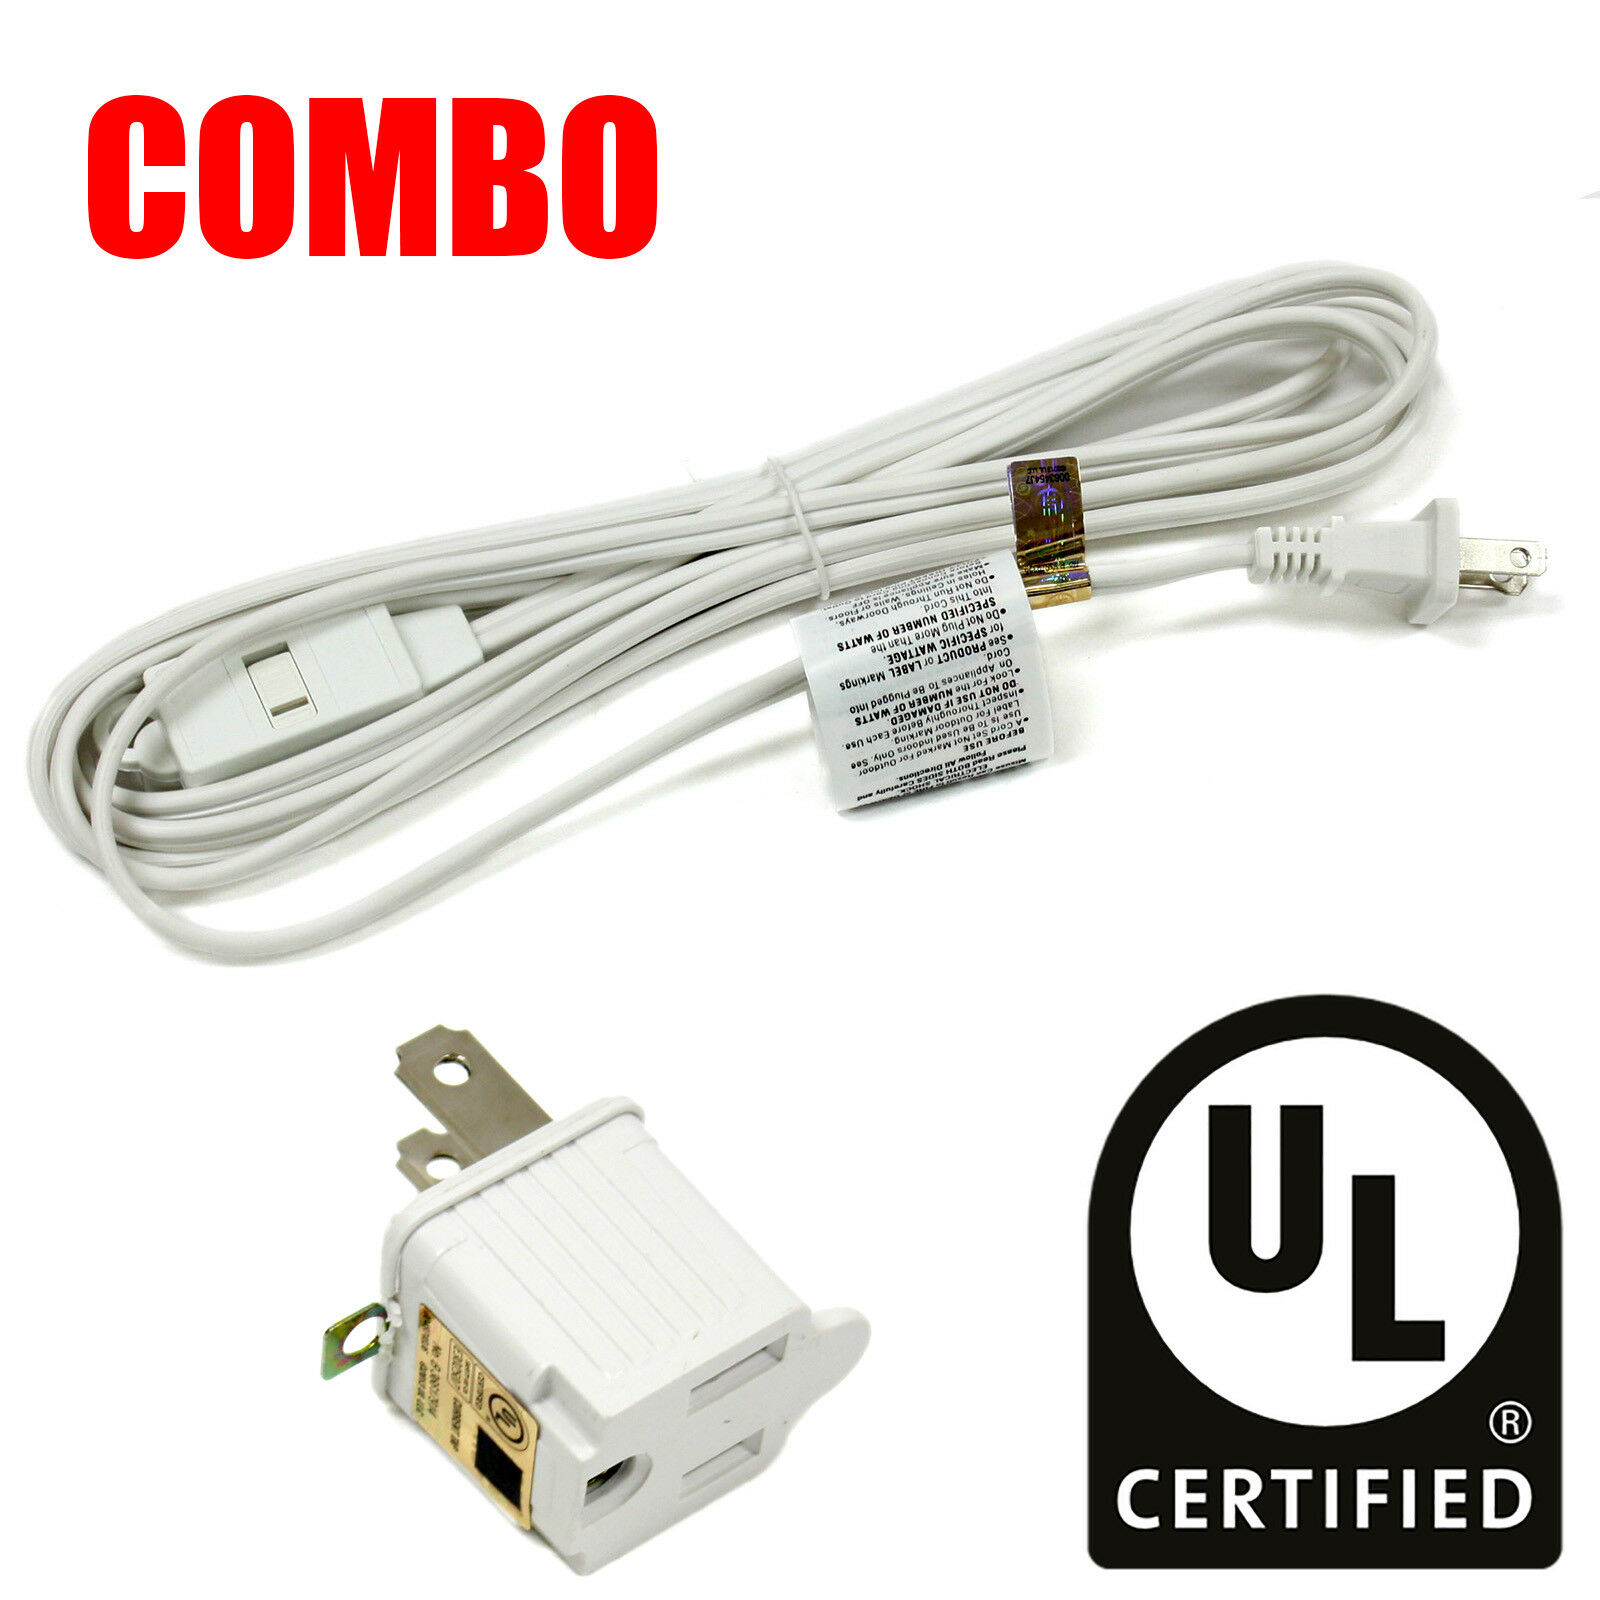 COMBO UL Certified 12ft 3 Outlet Extension Cord Cable & 2 to 3